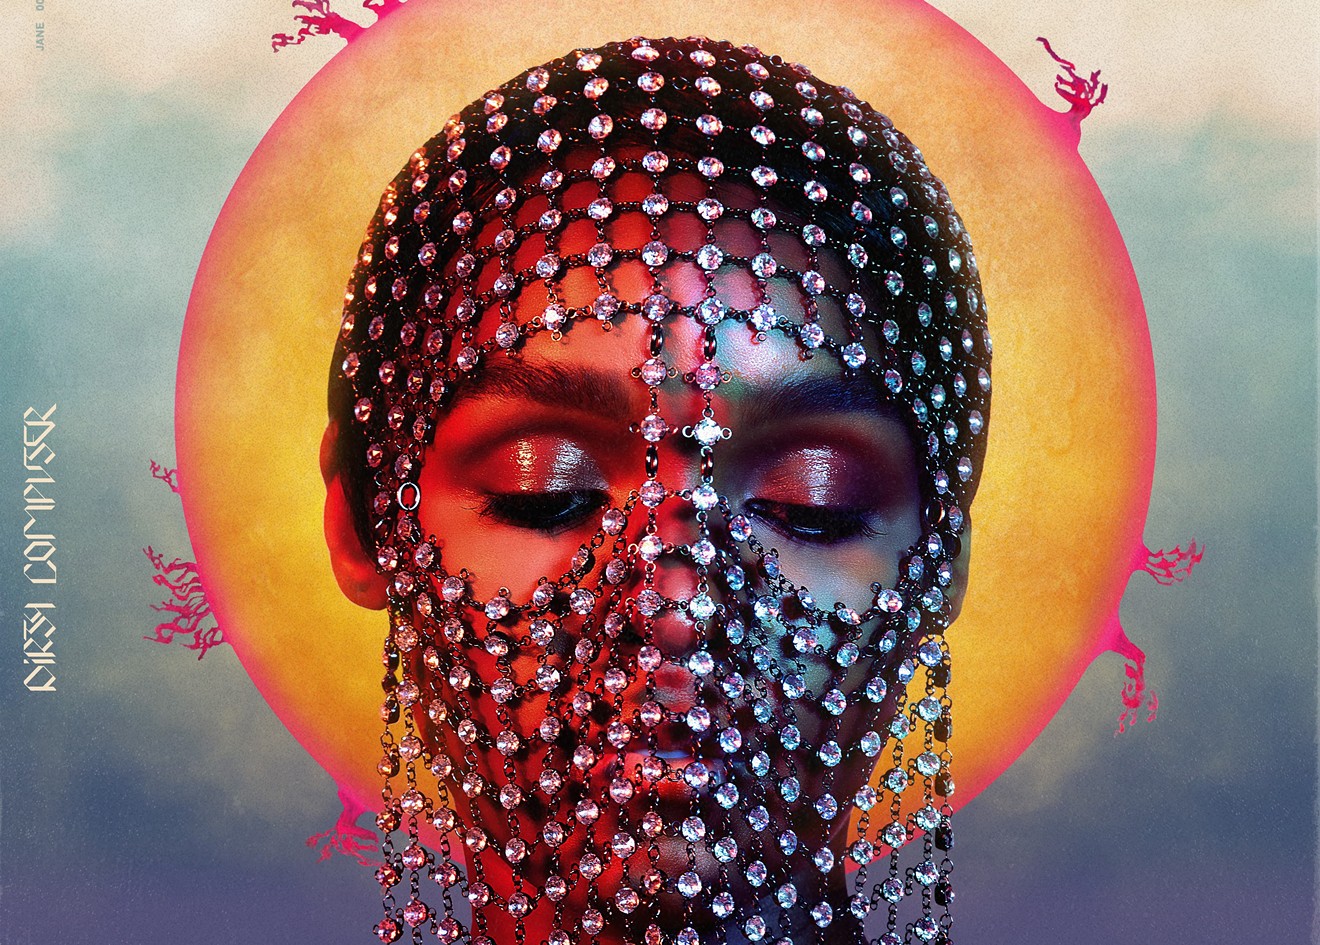 The cover of Janelle Monáe's soon-to-drop album, Dirty Computer.